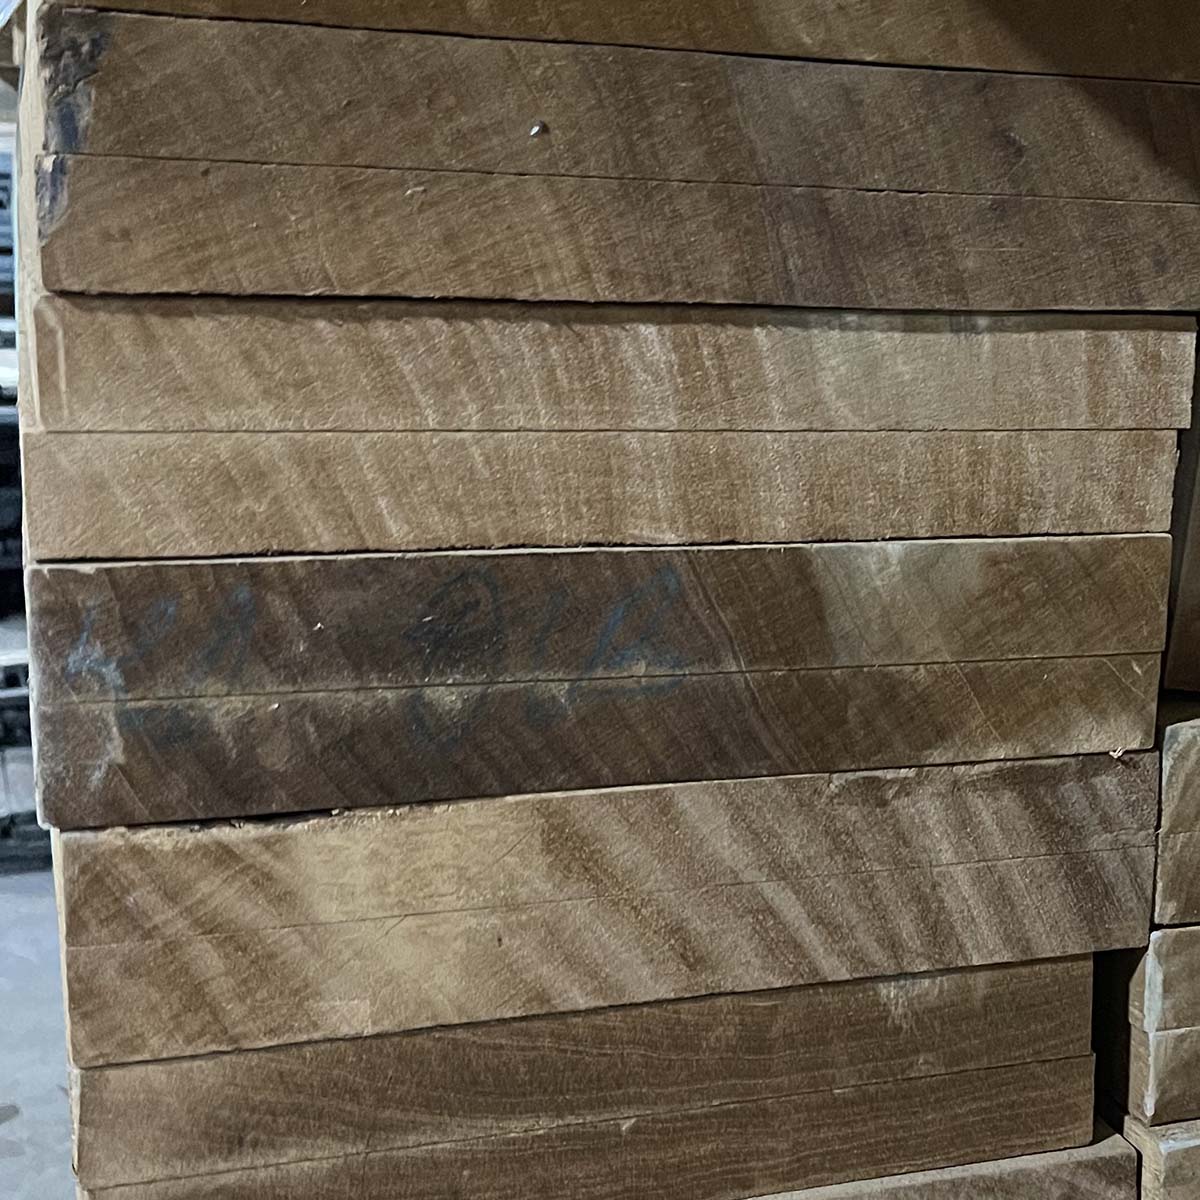 2x12 Ayous Resawn to 1x12's